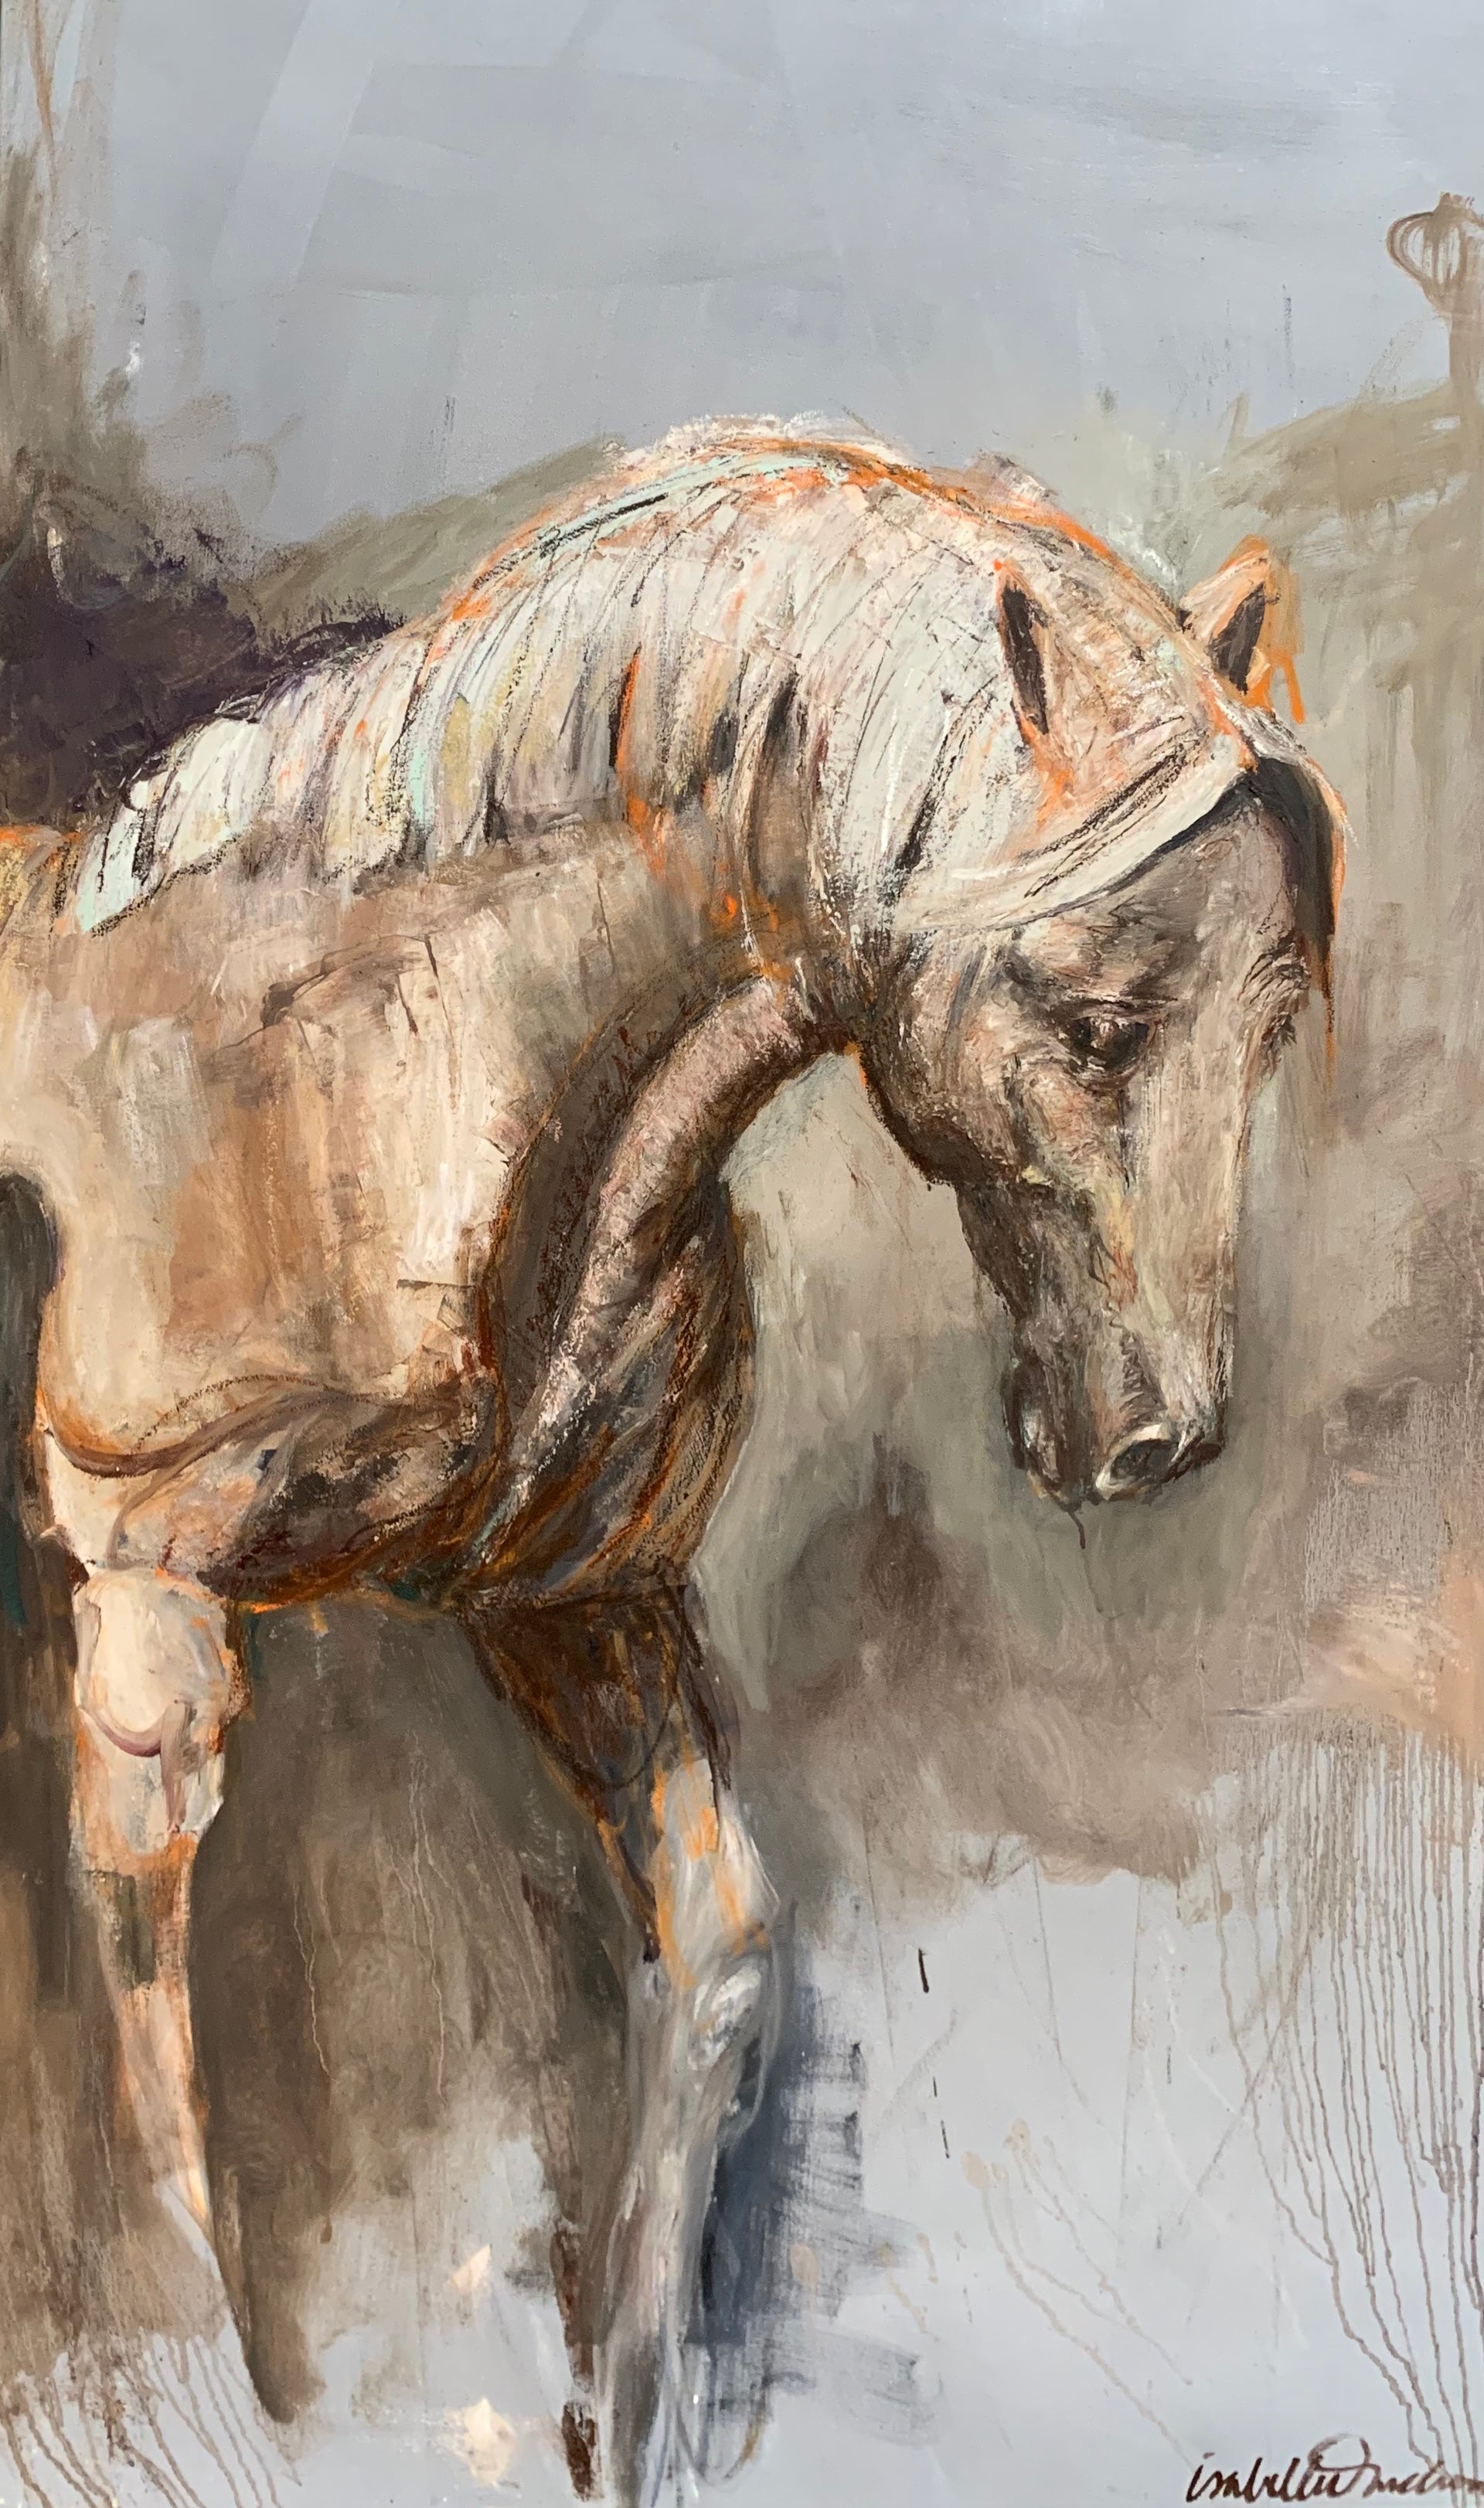 Original oil painting depicting a strong and graceful horse of the Camargue, France. This original is newly released and freshly painted. I call him/her "Wanderer", a sole traveller, explorer, dreamer, a creator of his/her own destiny.